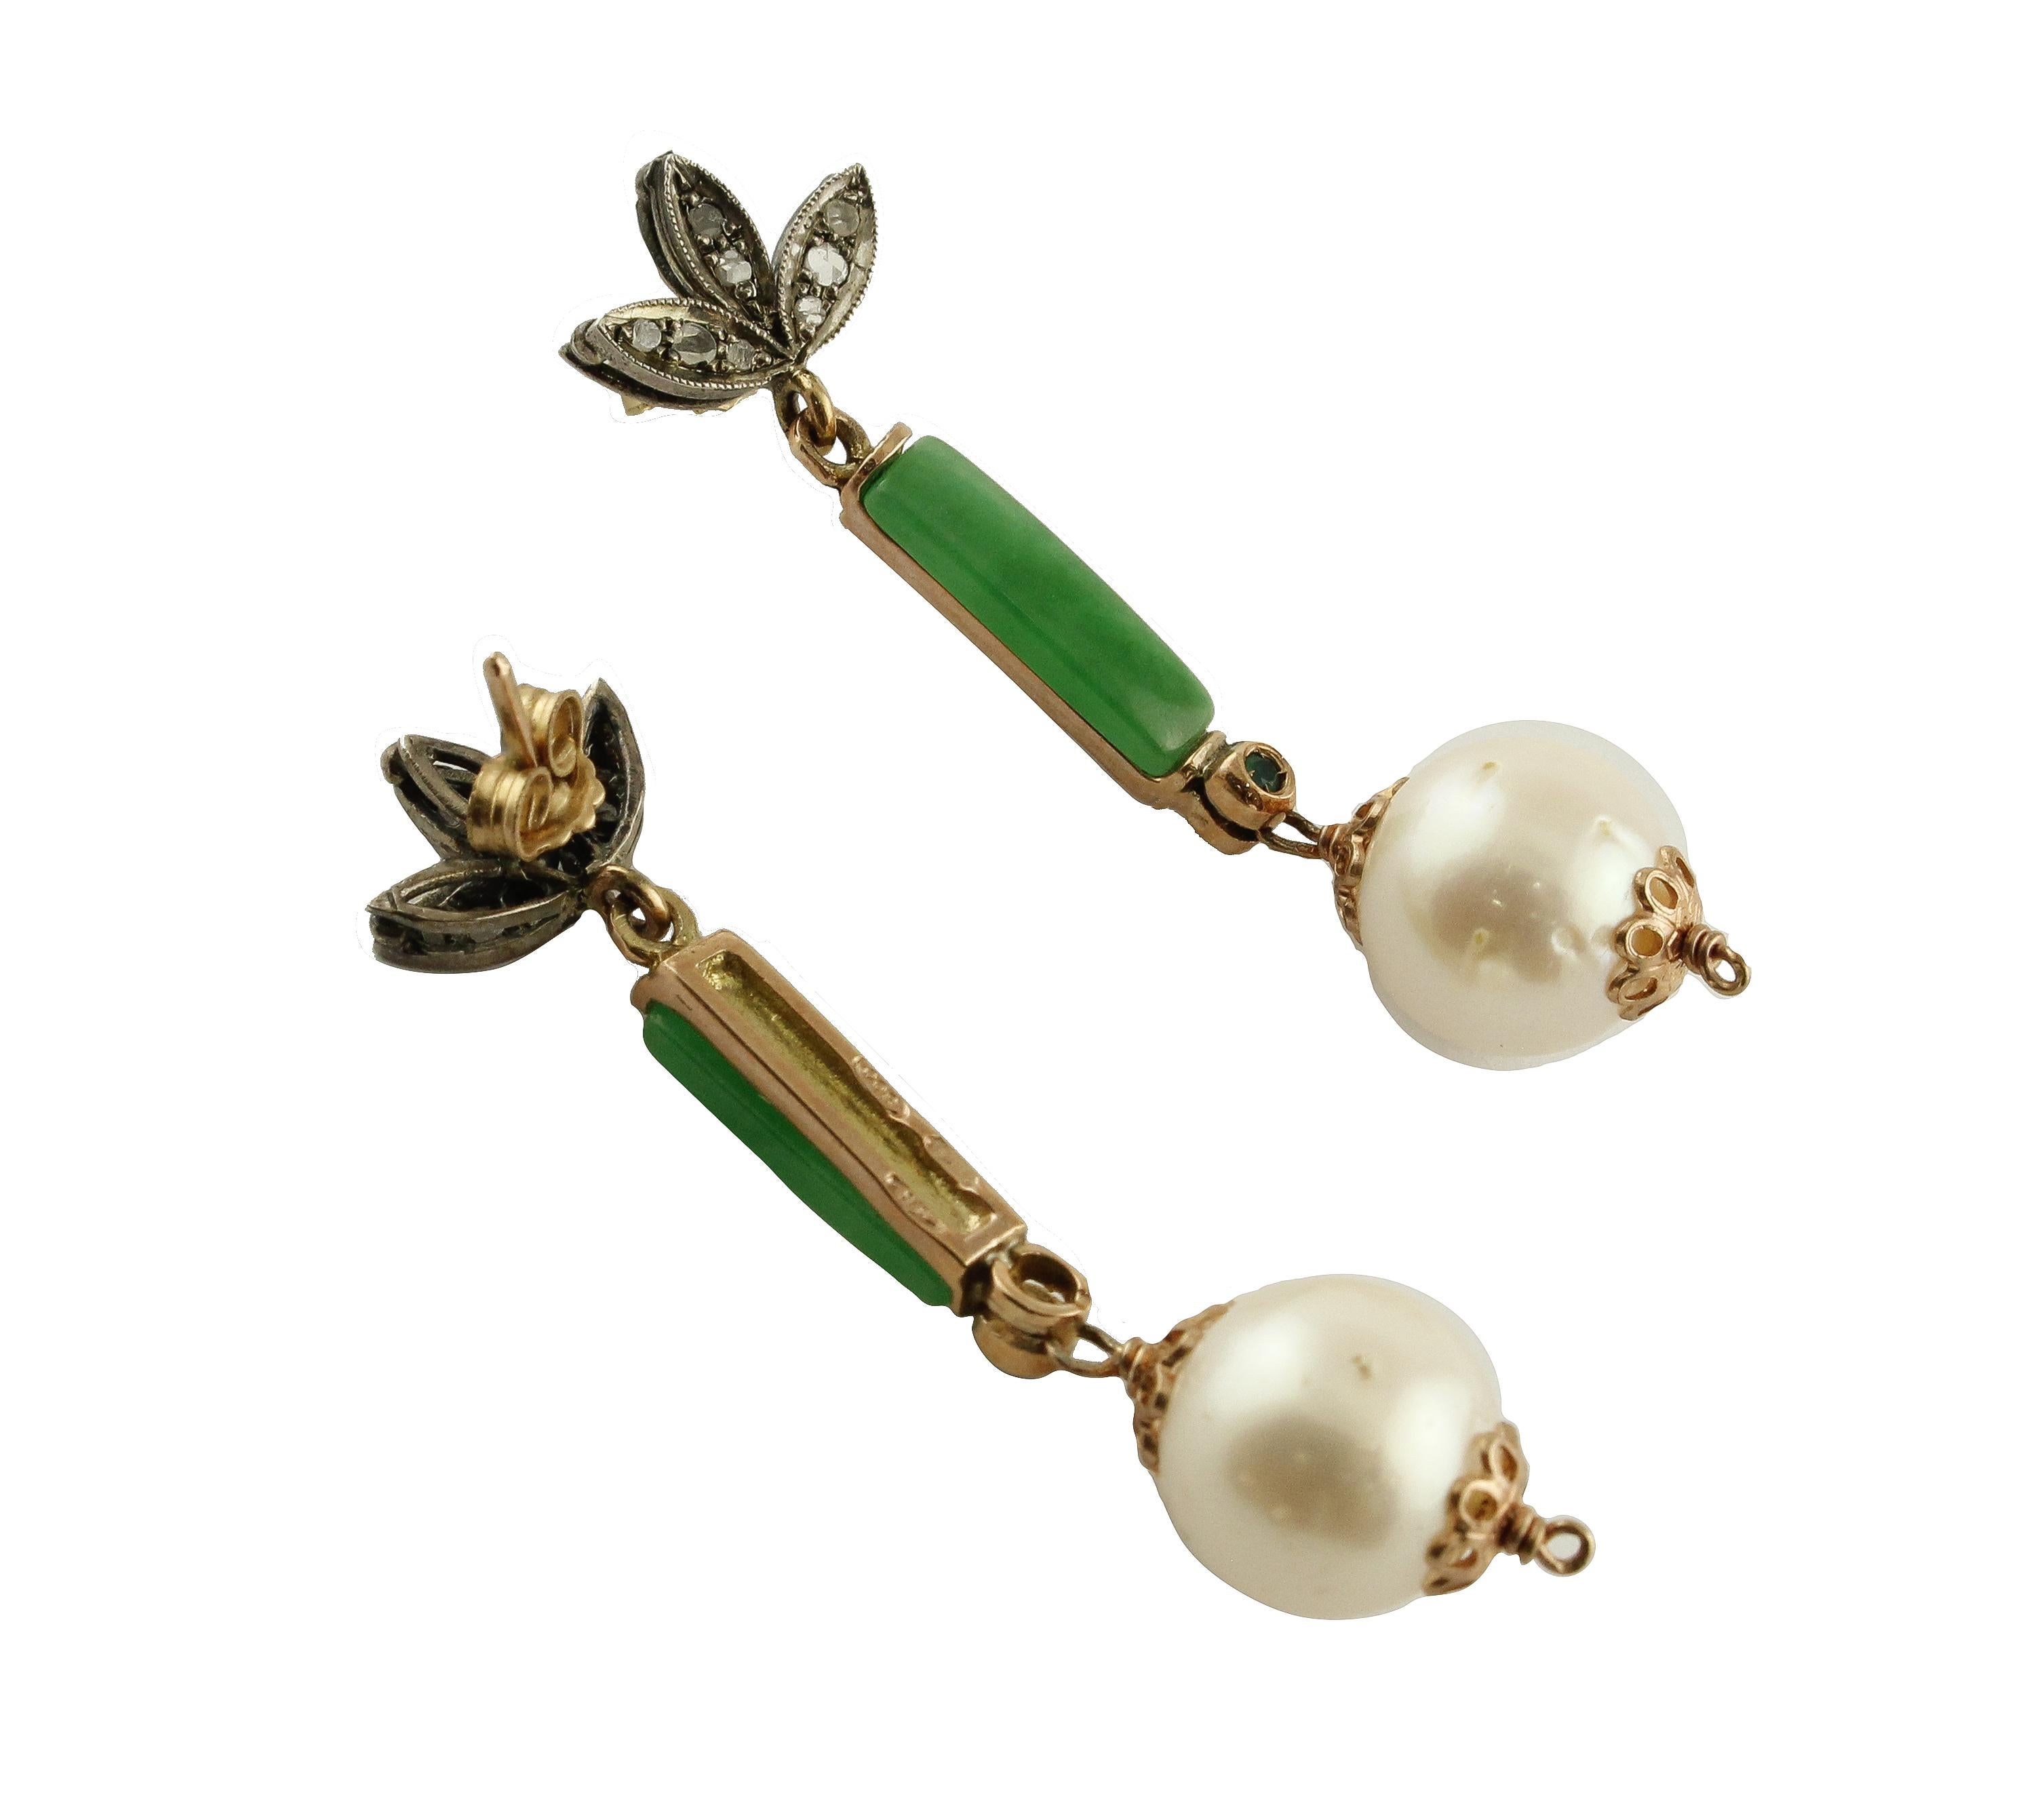 Retro Diamonds Emeralds Green Jade White Pearls Rose Gold and Silver Stud Earrings